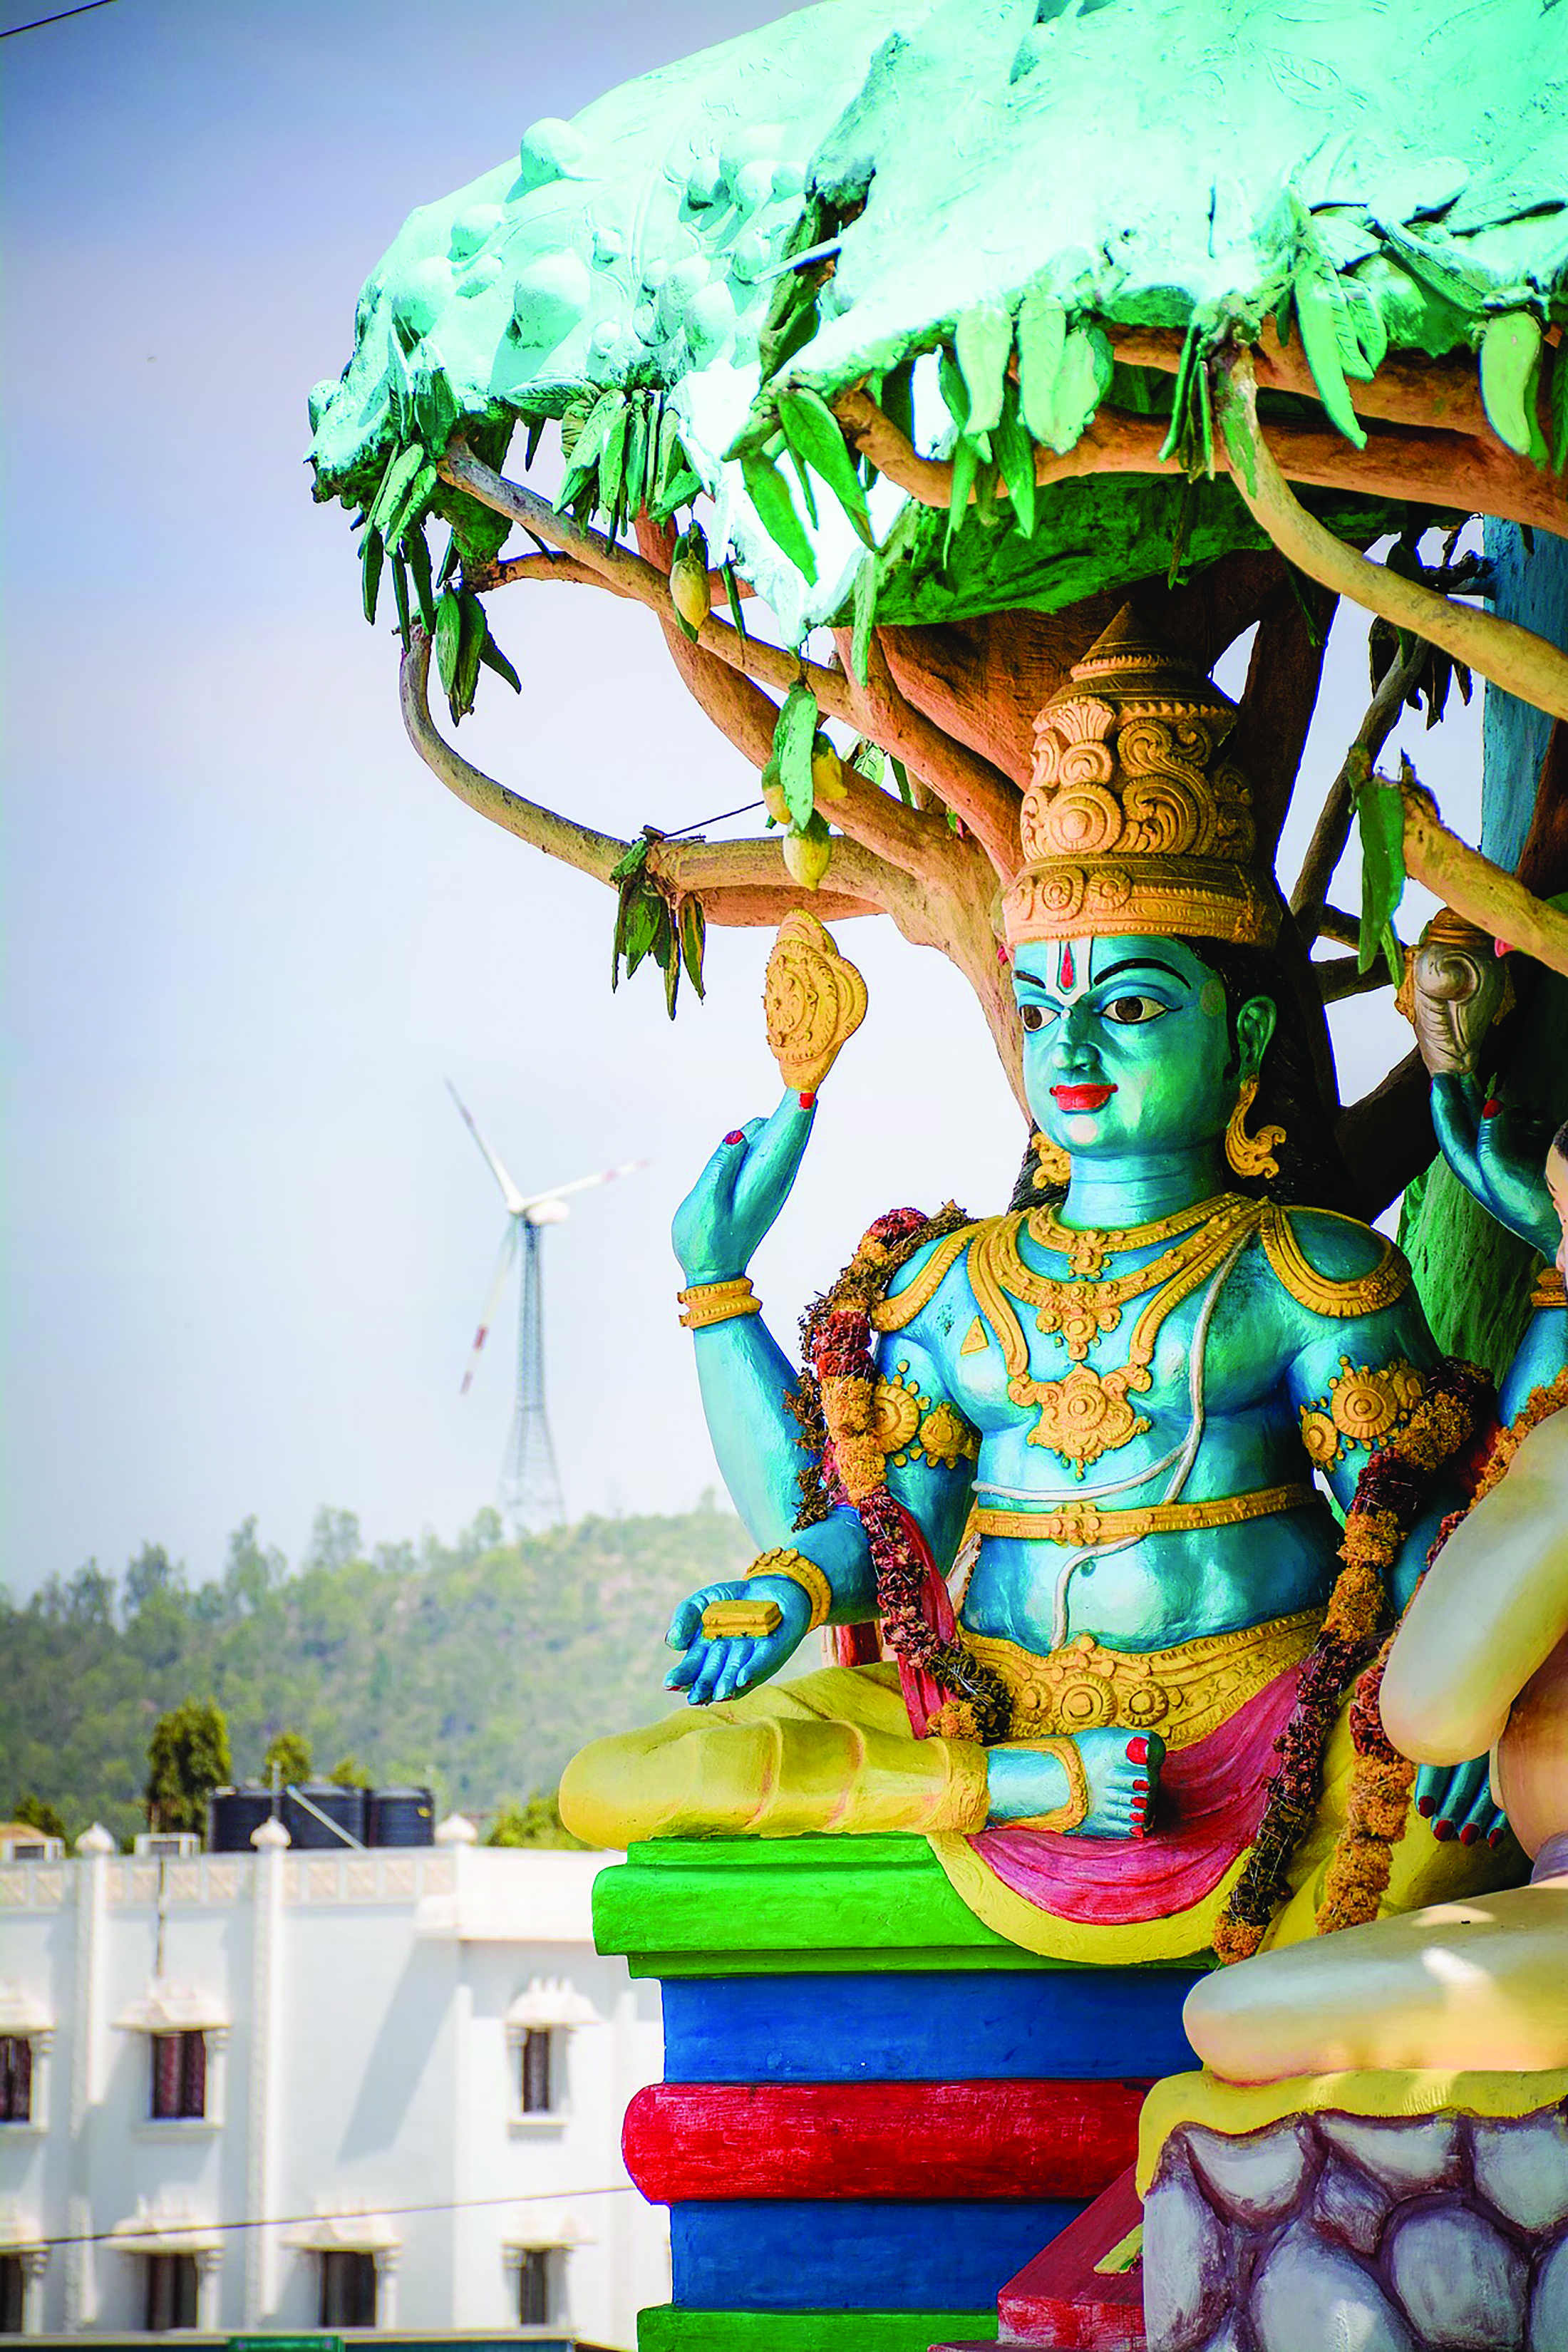 Wind turbines in the hills of the holy city of Tirumala, India, with a wooden figure of Vishnu, one of the principal deities of Hinduism, in the foreground.